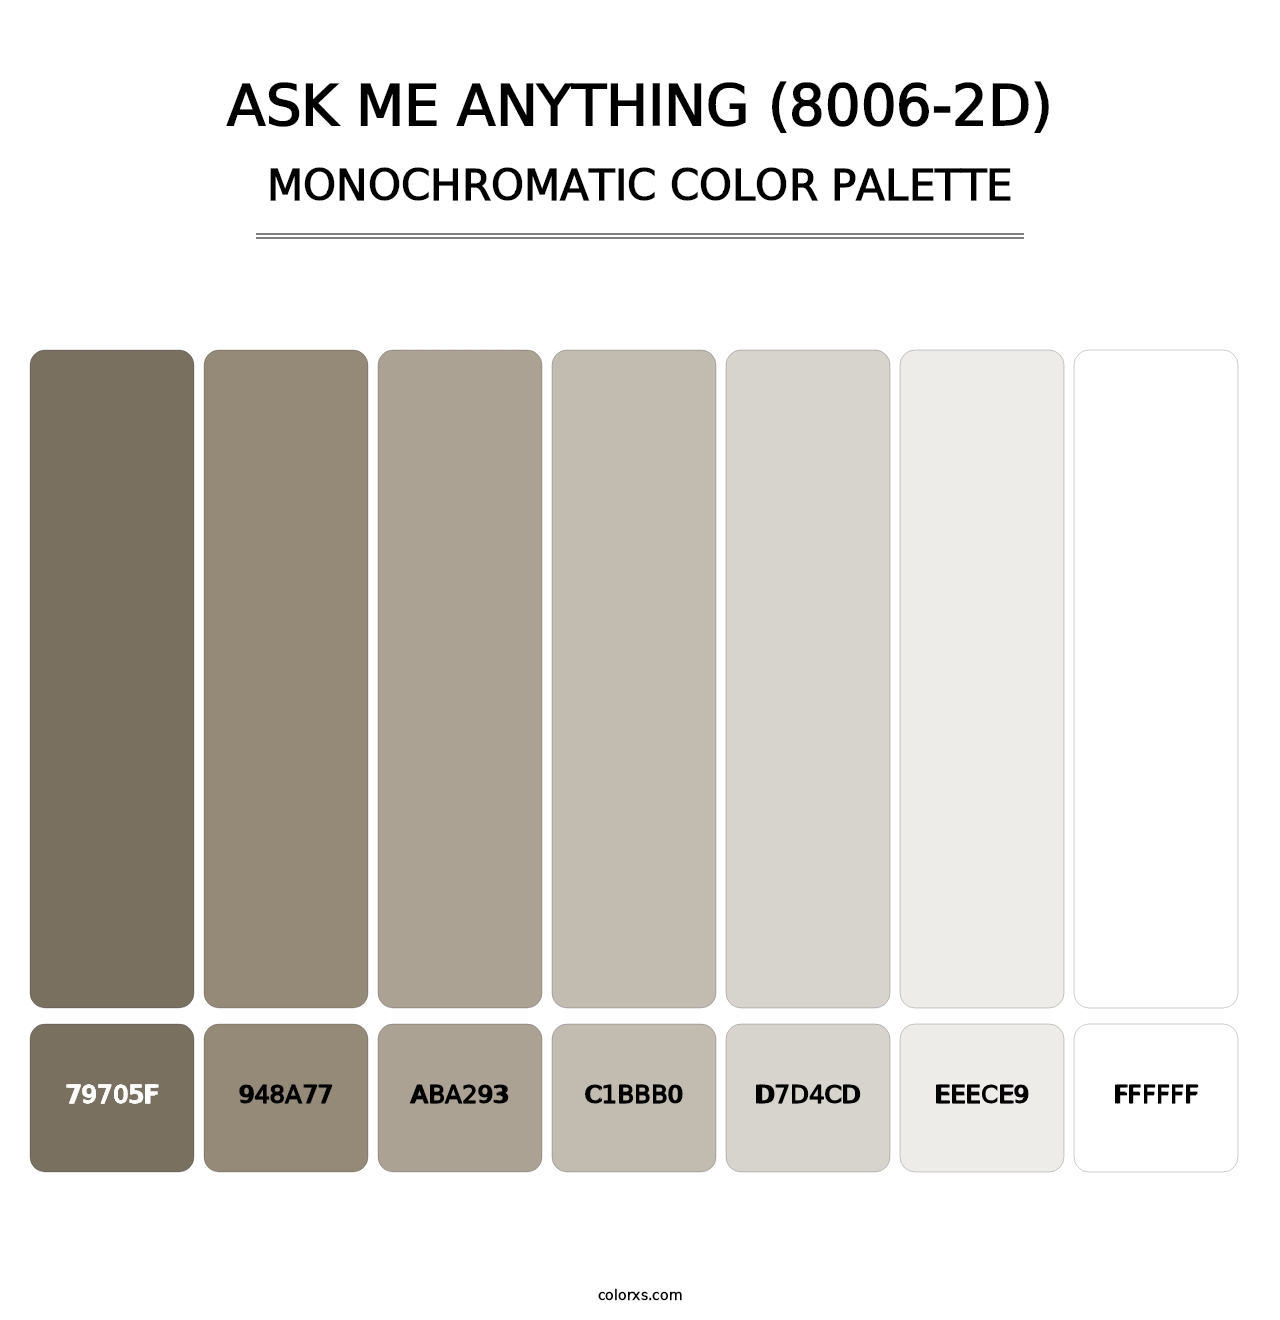 Ask Me Anything (8006-2D) - Monochromatic Color Palette